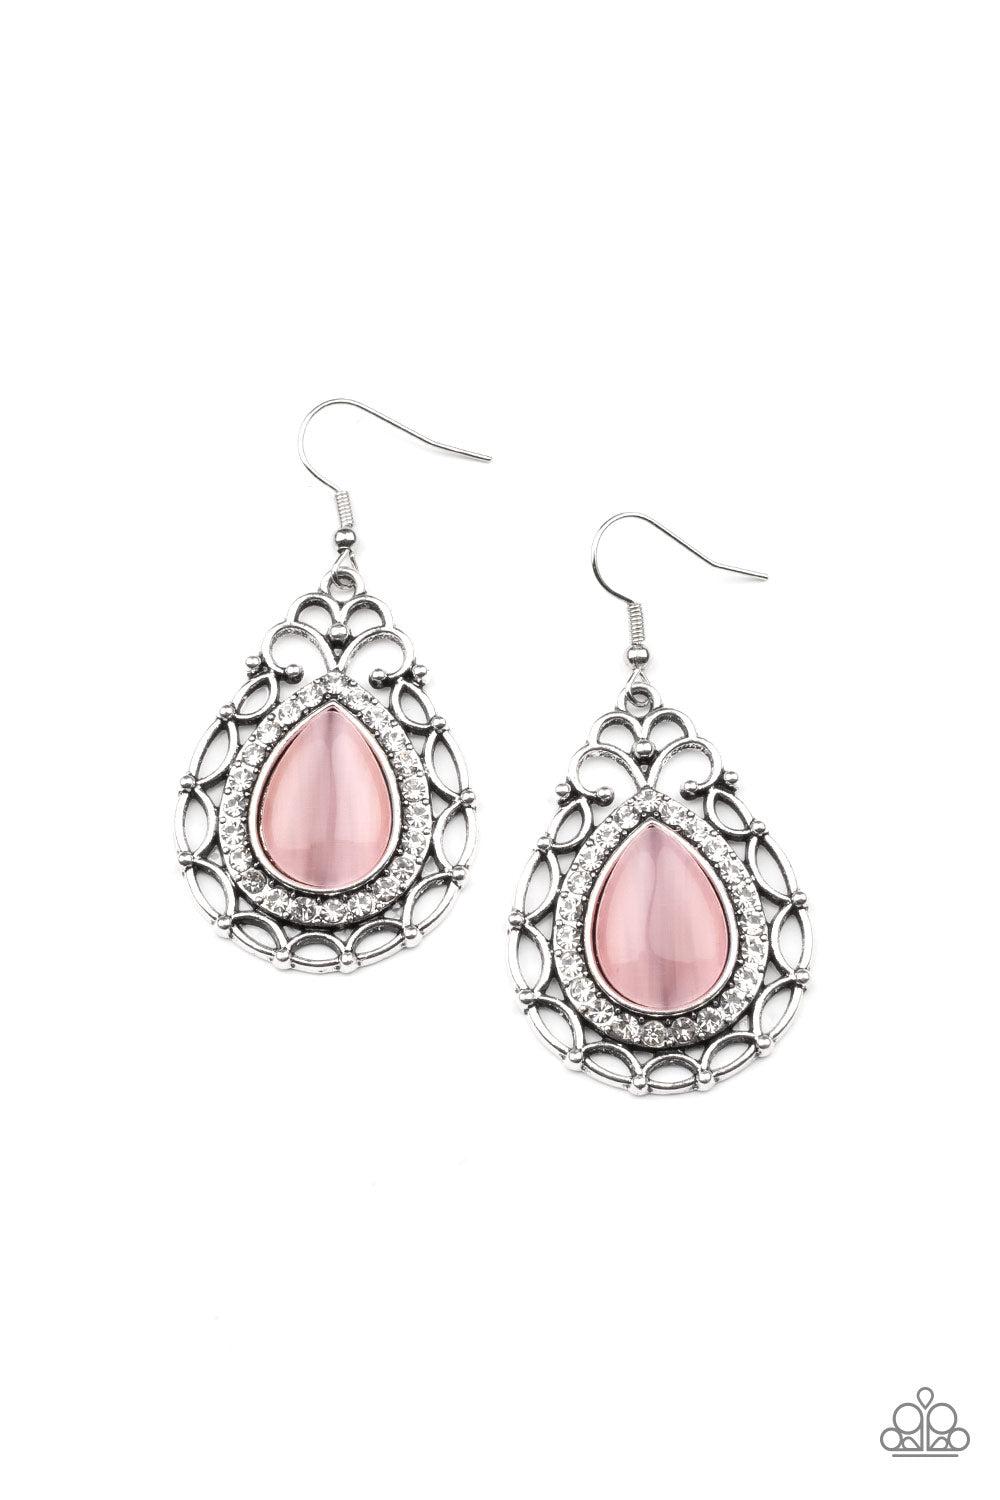 Endlessly Enchanting Pink Cat's Eye Stone Earrings - Paparazzi Accessories- lightbox - CarasShop.com - $5 Jewelry by Cara Jewels